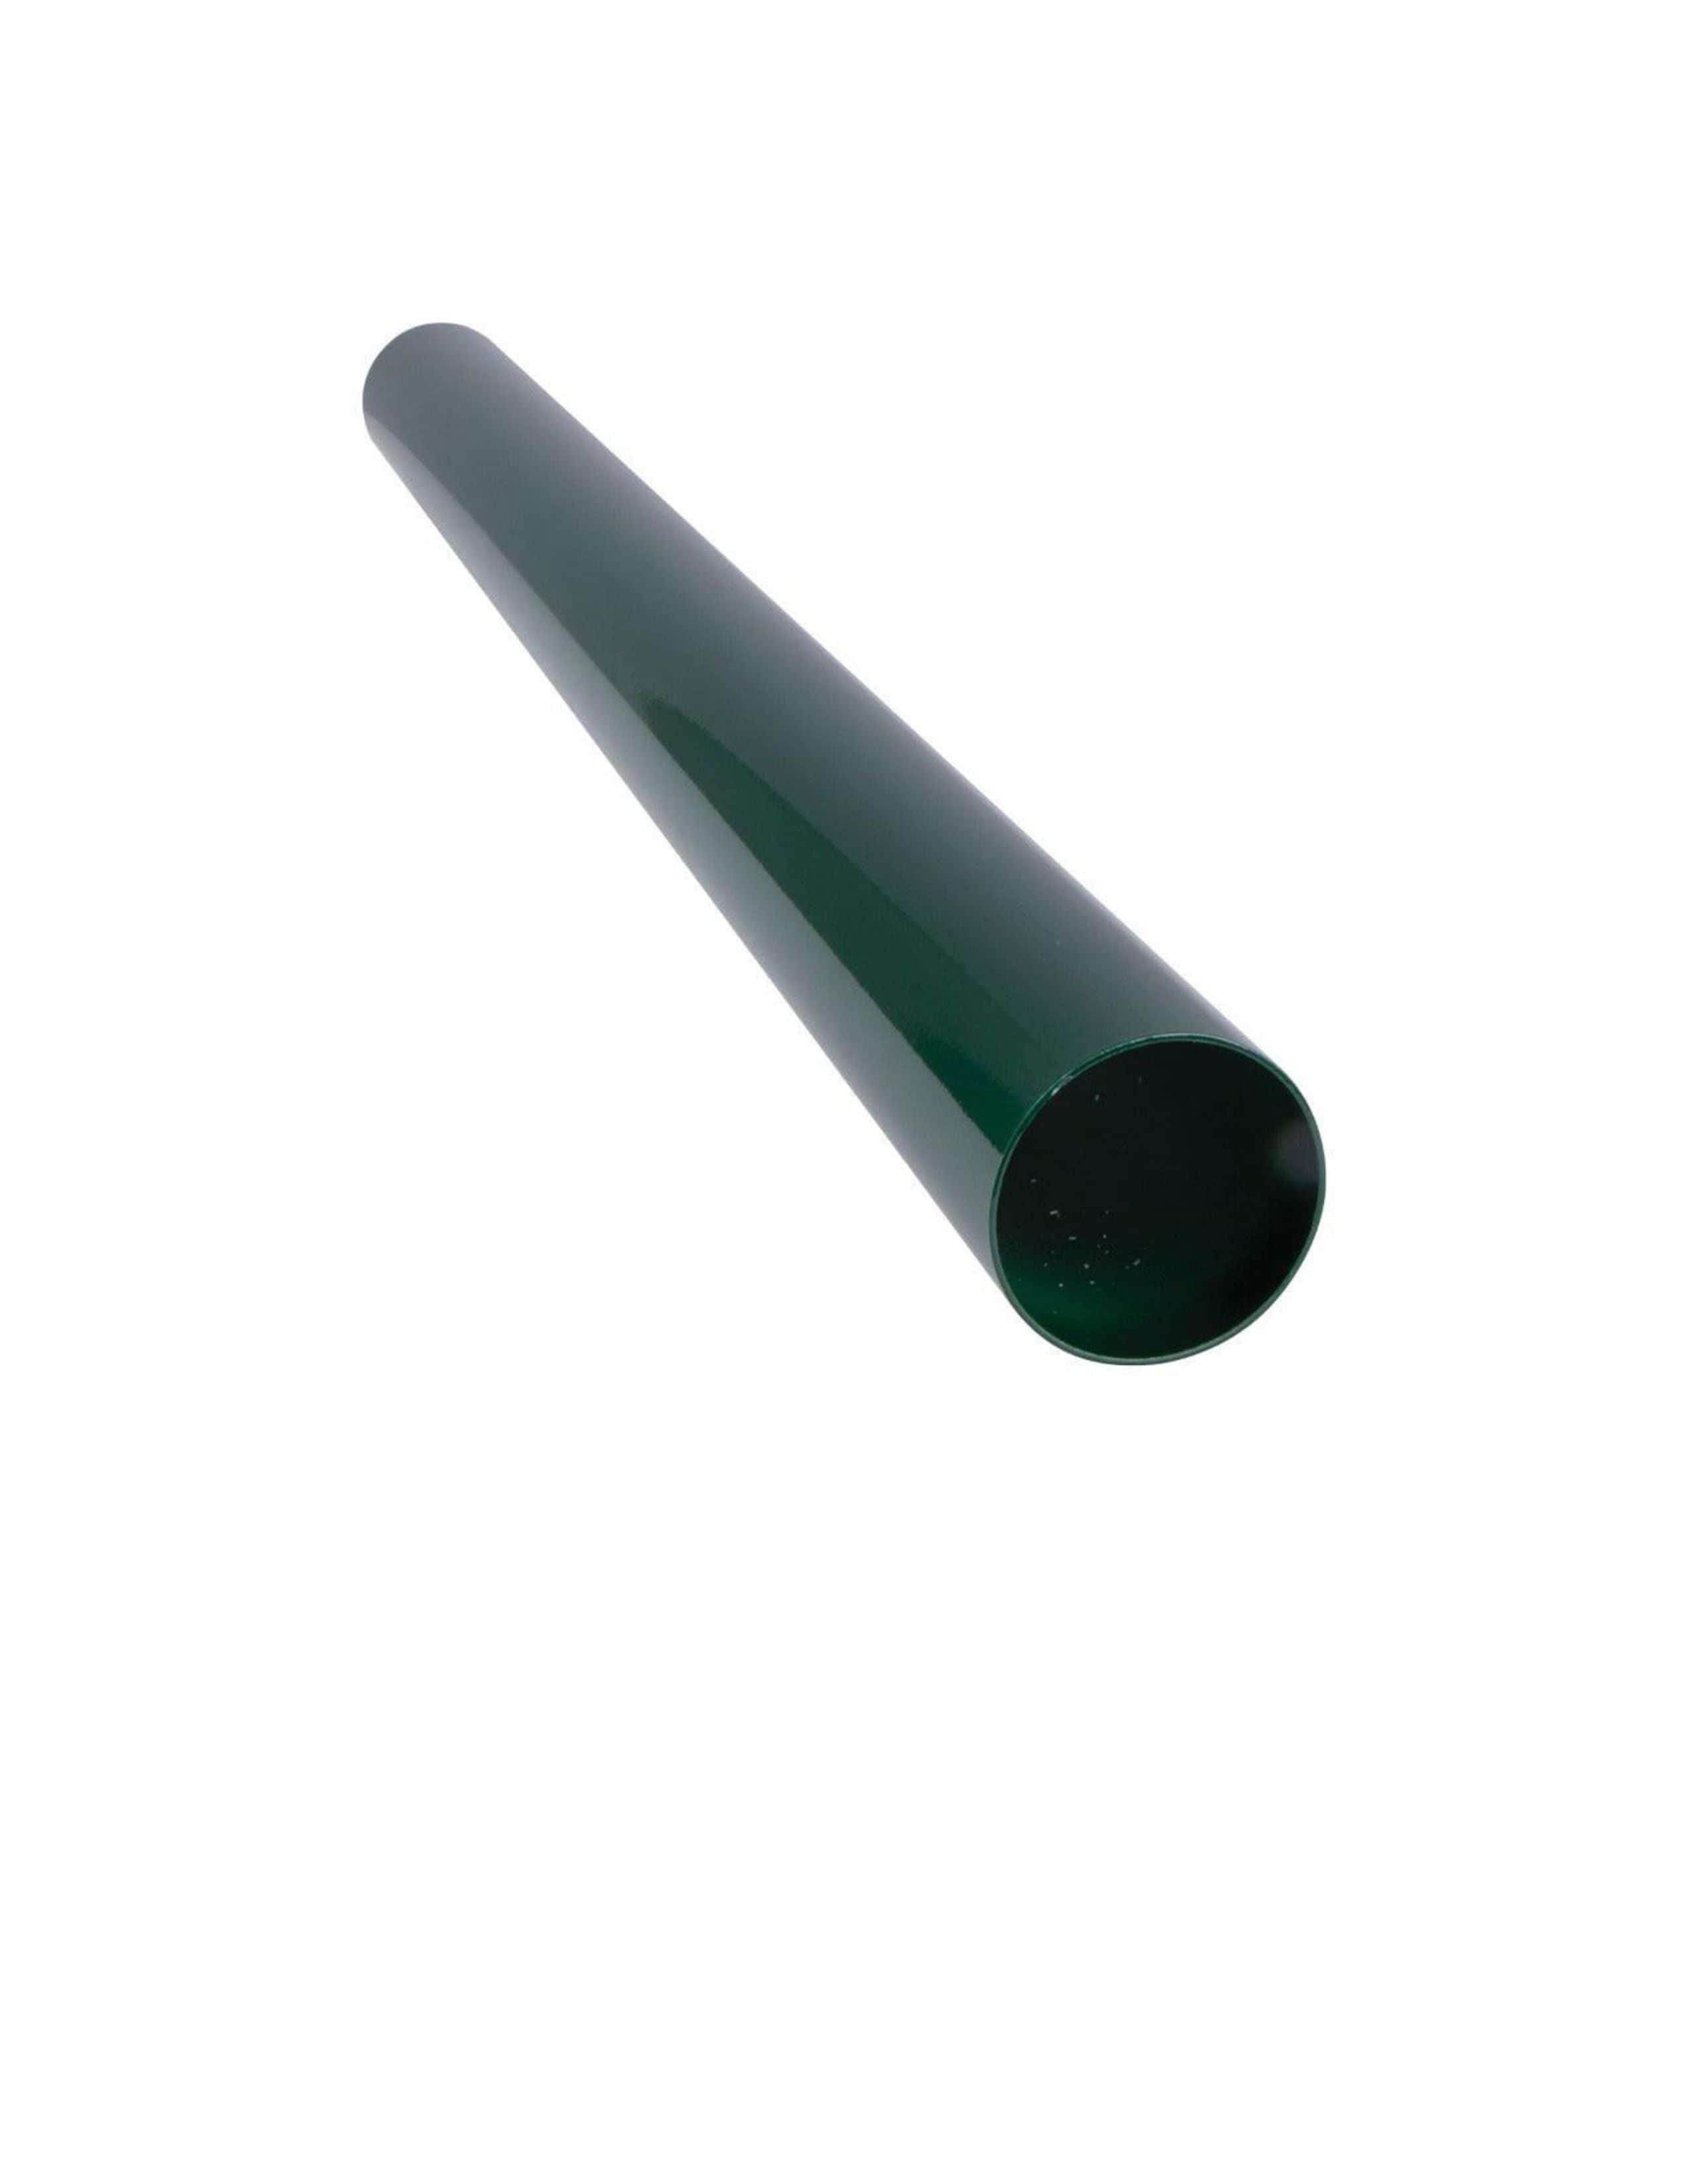 Domus Lighting Exterior Posts Pipe GREEN / 1.0 M Aluminum Post 76mm Powder Coated Finish Lights-For-You 10852